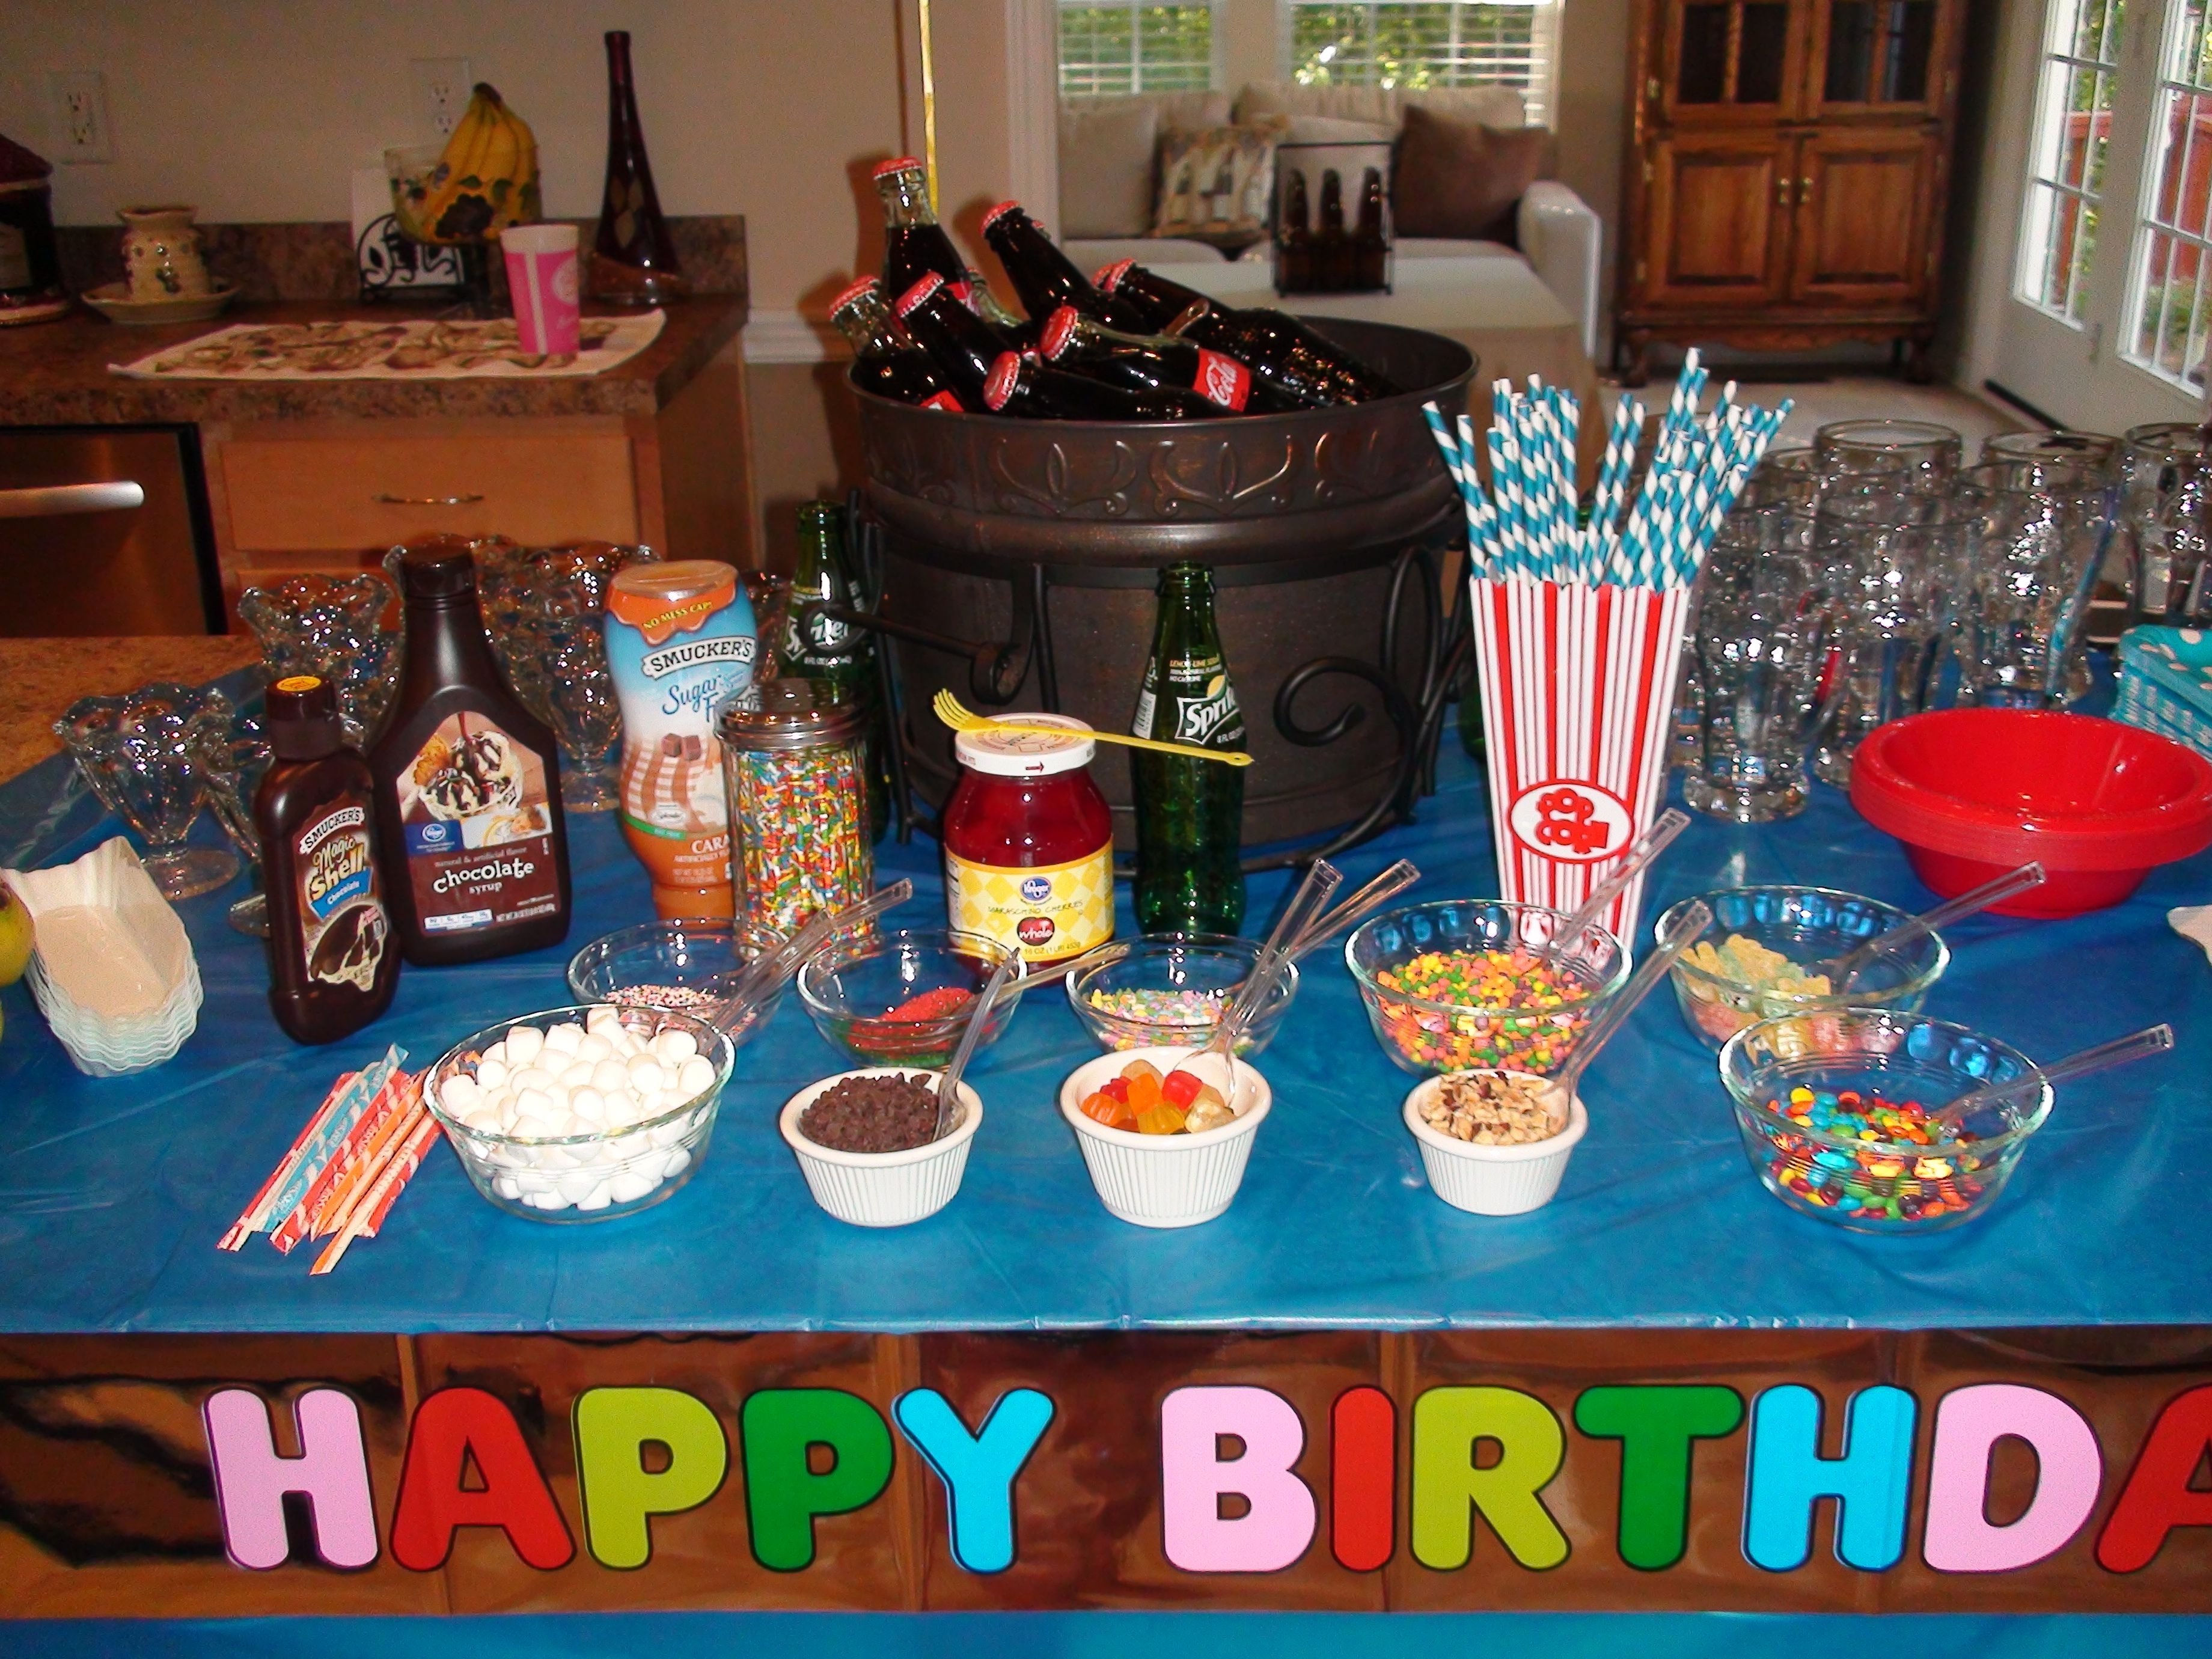 10 Awesome Good Birthday Party Ideas For 12 Year Olds 12 year old party root beer floats banana splits ice cream with 2 2023